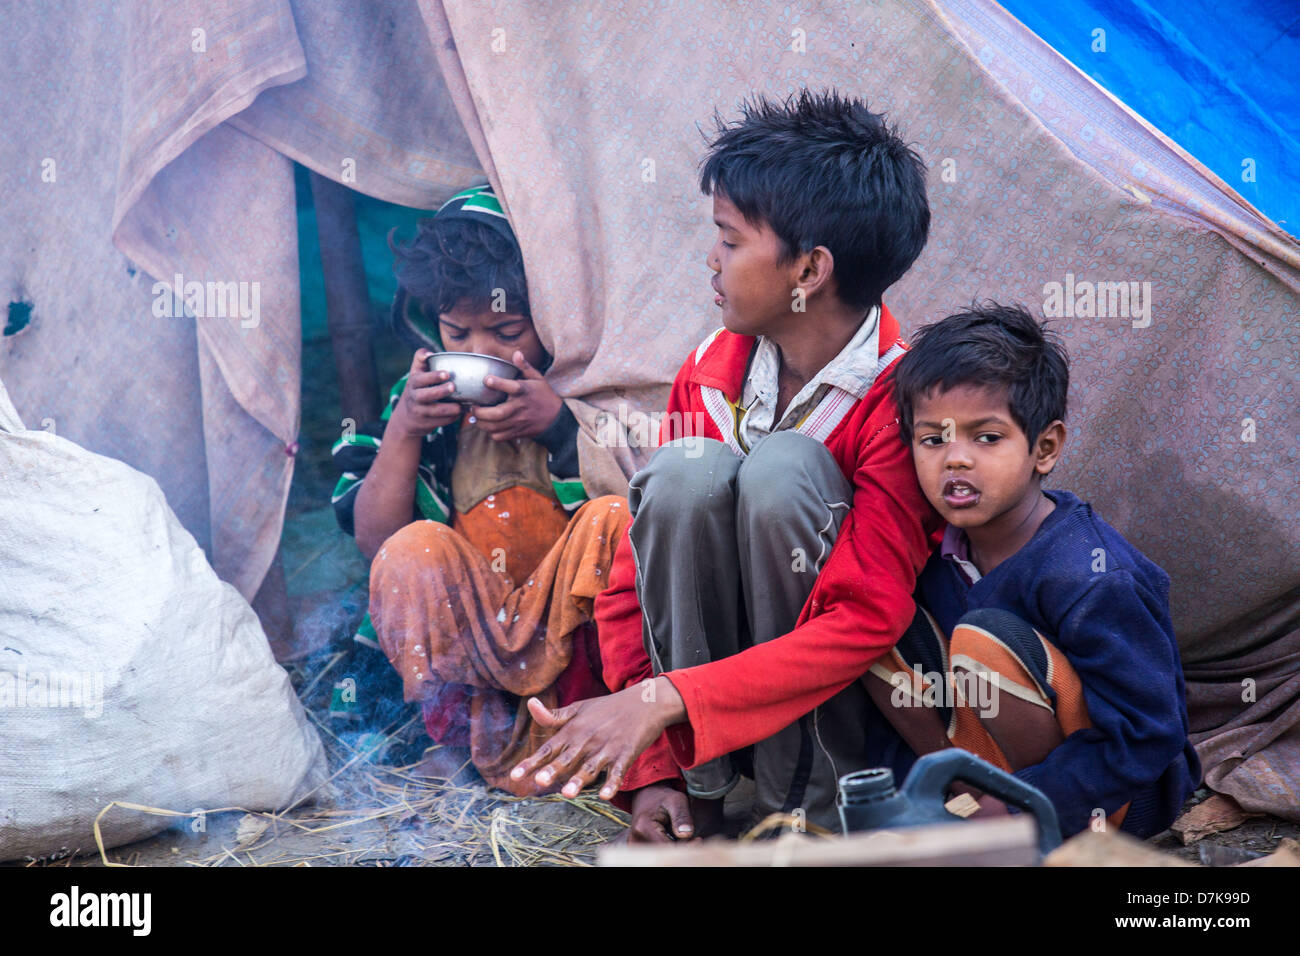 Children living in a tent village, Allahabad, India Stock Photo